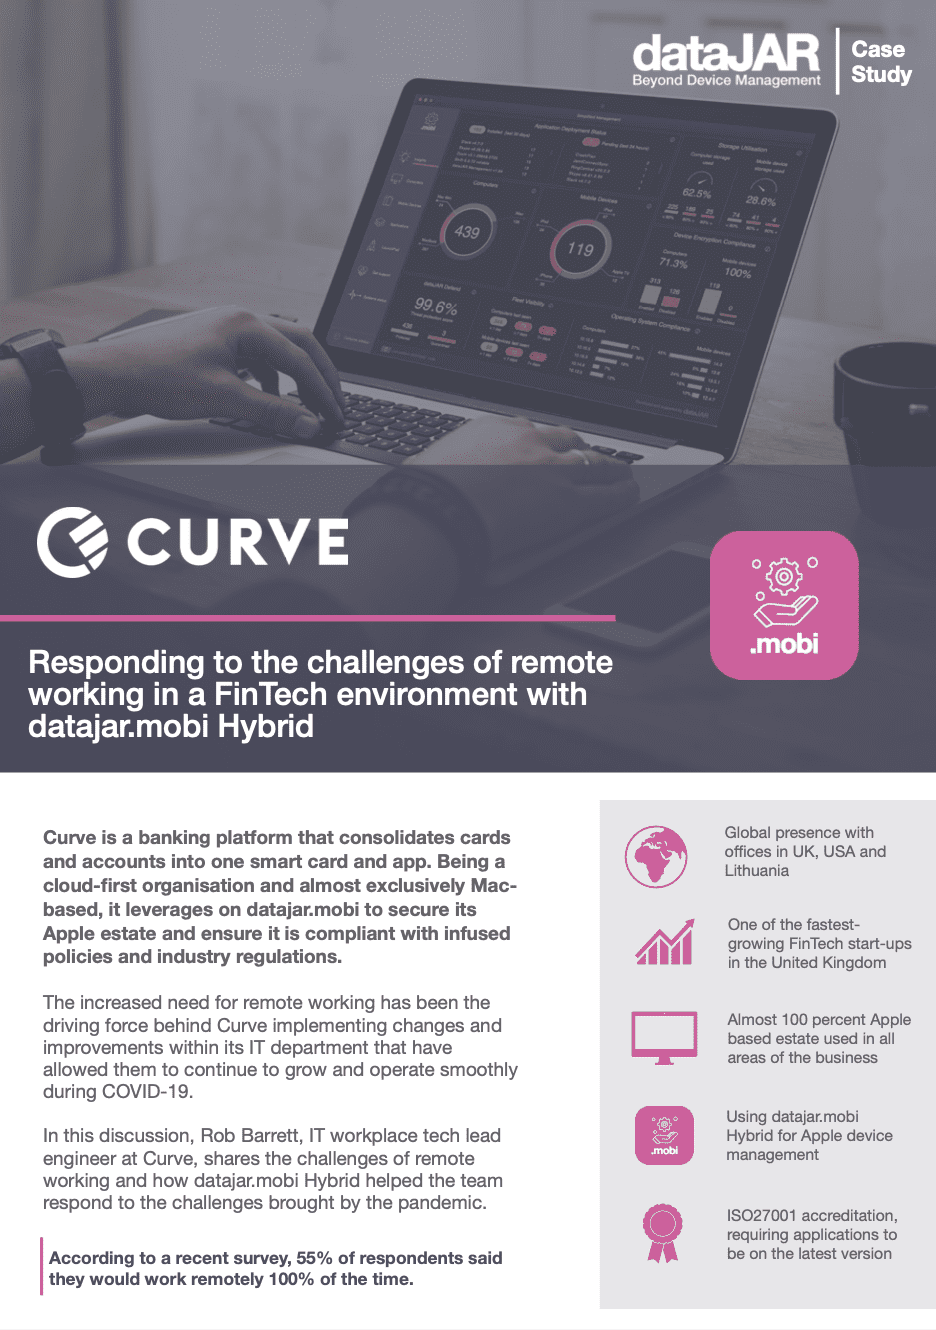 Curve - Responding to the challenges of remote working in a FinTech environment with datajar.mobi Hybrid